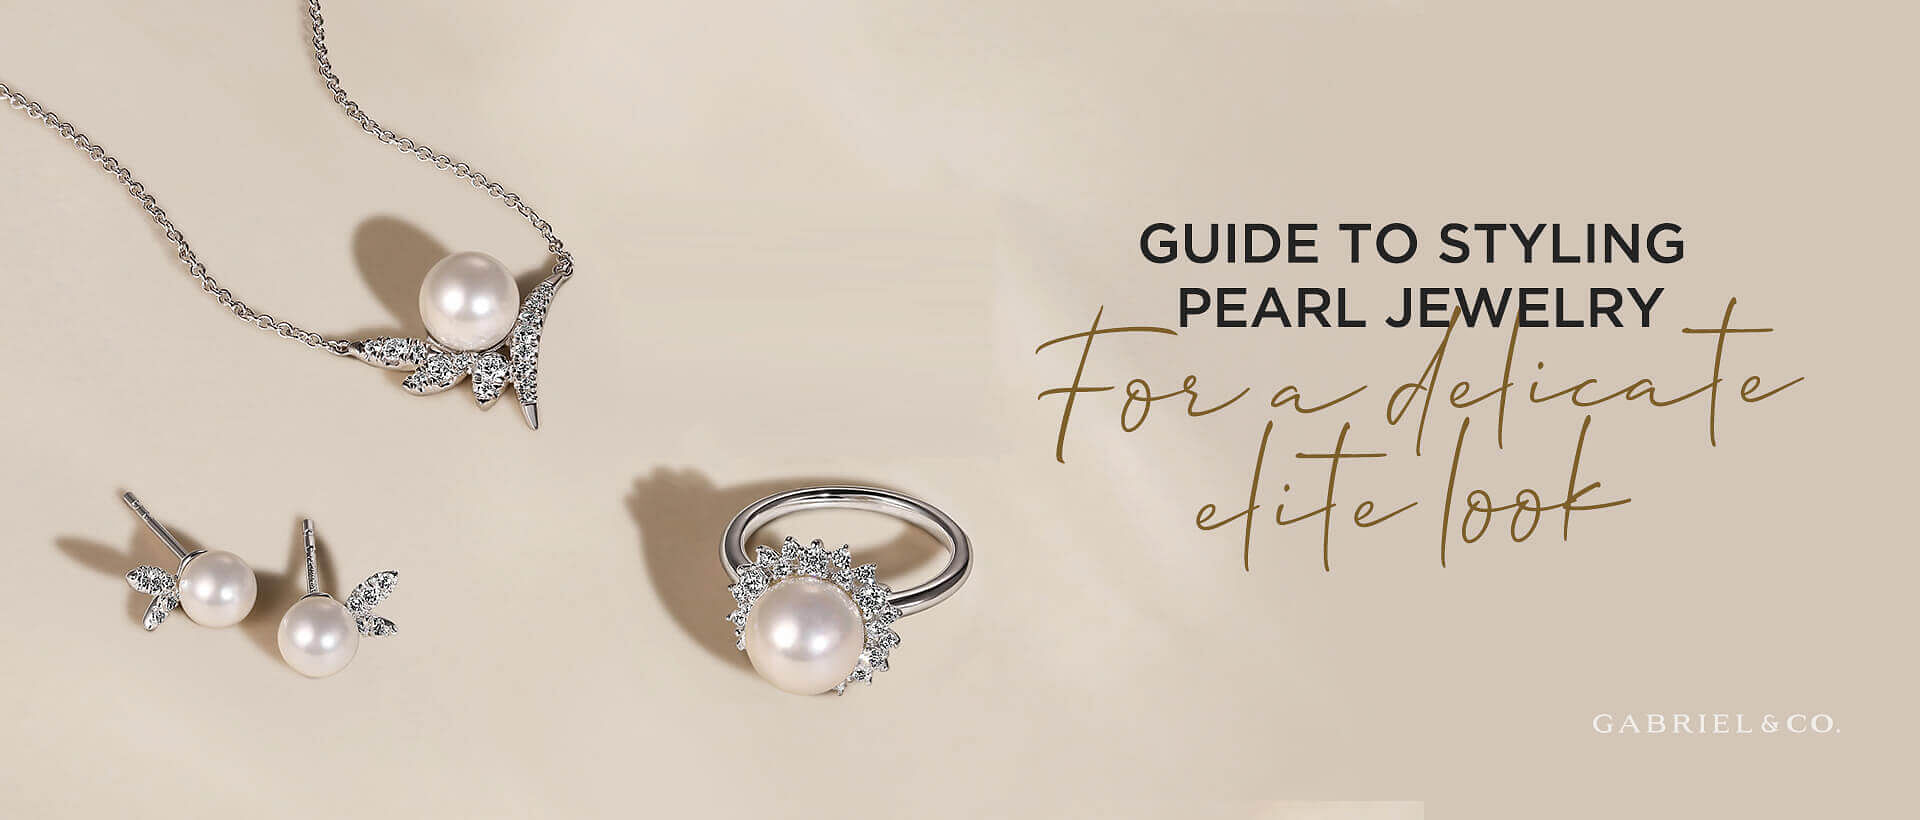 Guide to Styling Pearl Jewelry for a Delicate Elite Look